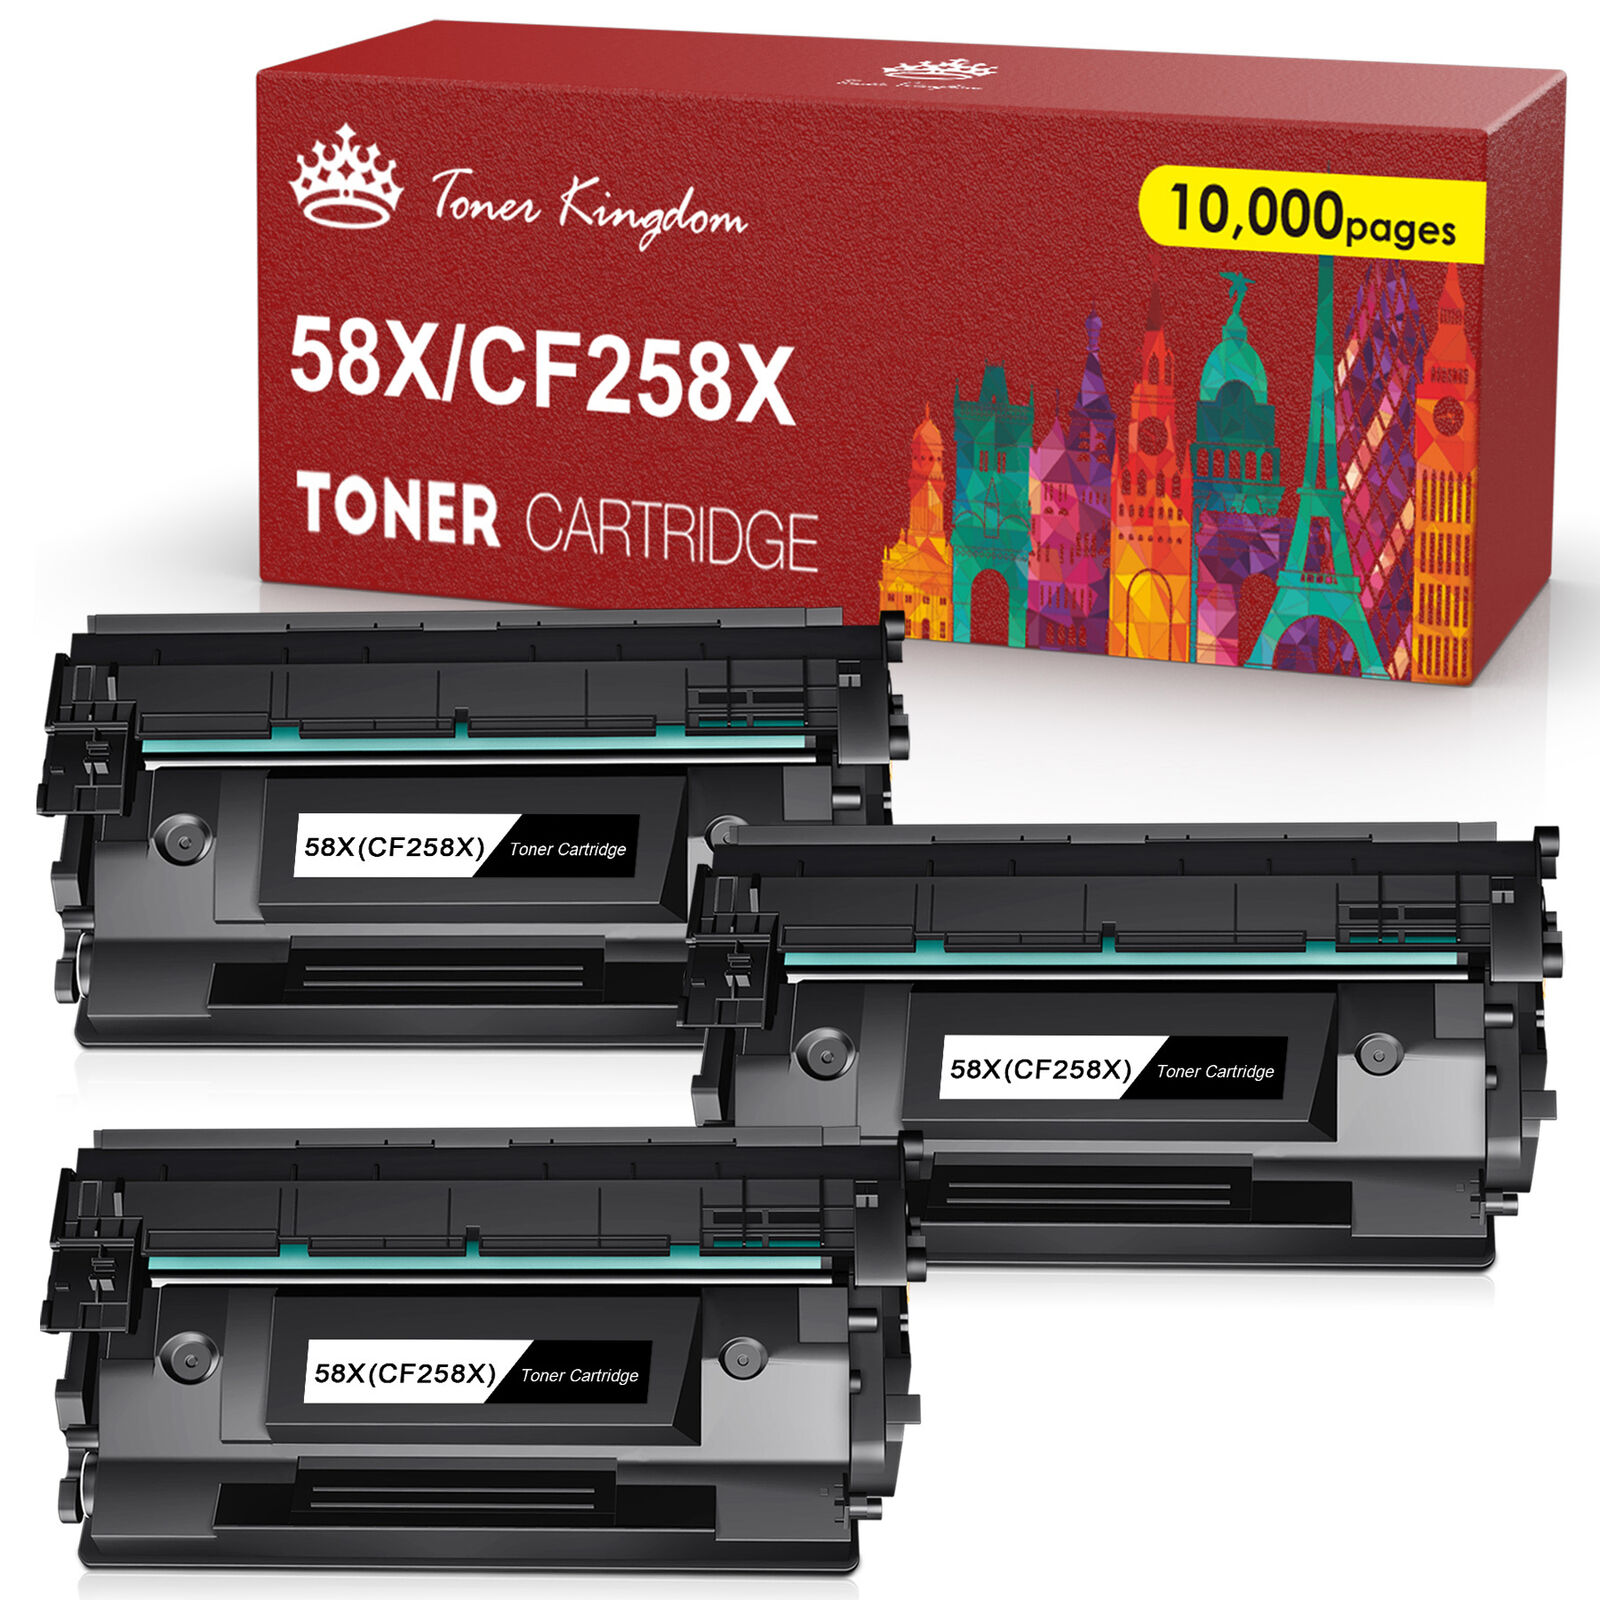 3x CF258X 58X Toner Replacement for HP LaserJet Pro M404dw M428fdw (WITH CHIP)